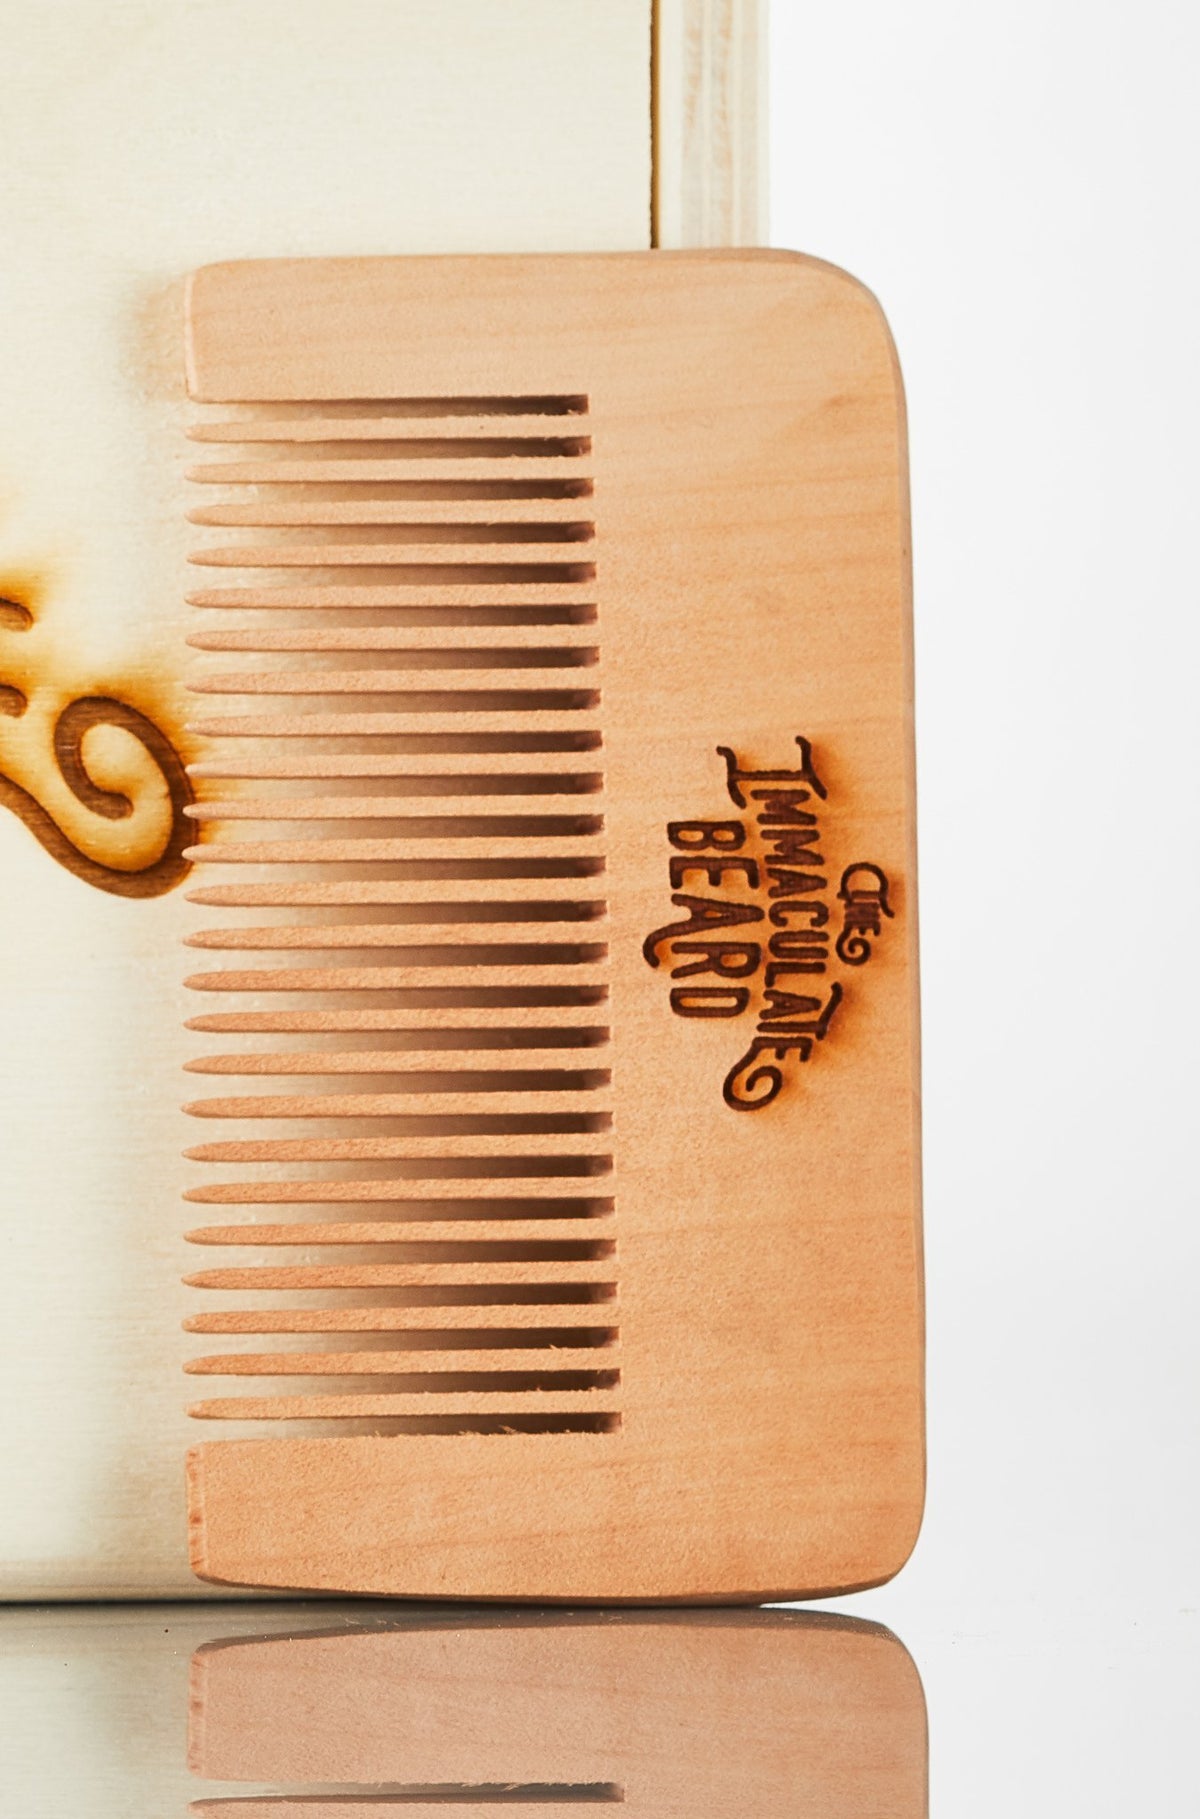 Close-up of The Immaculate Beard - Wooden Beard Comb with fine and wide teeth, featuring the engraved text "taming the beard" on its body, placed against a light background.